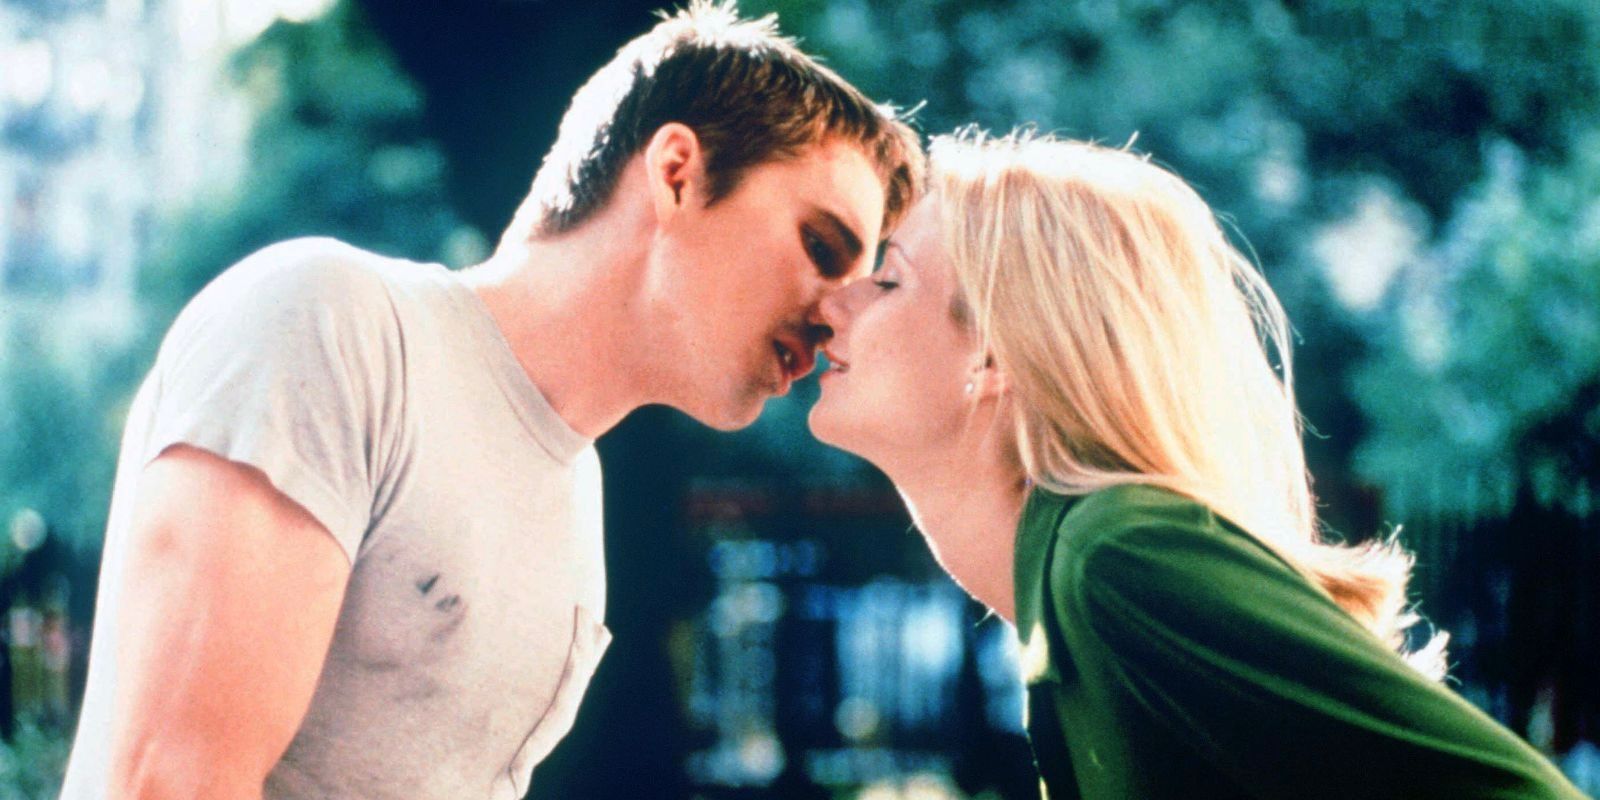 Ethan Hawke and Gwyneth Paltrow kissing in Great Expectations